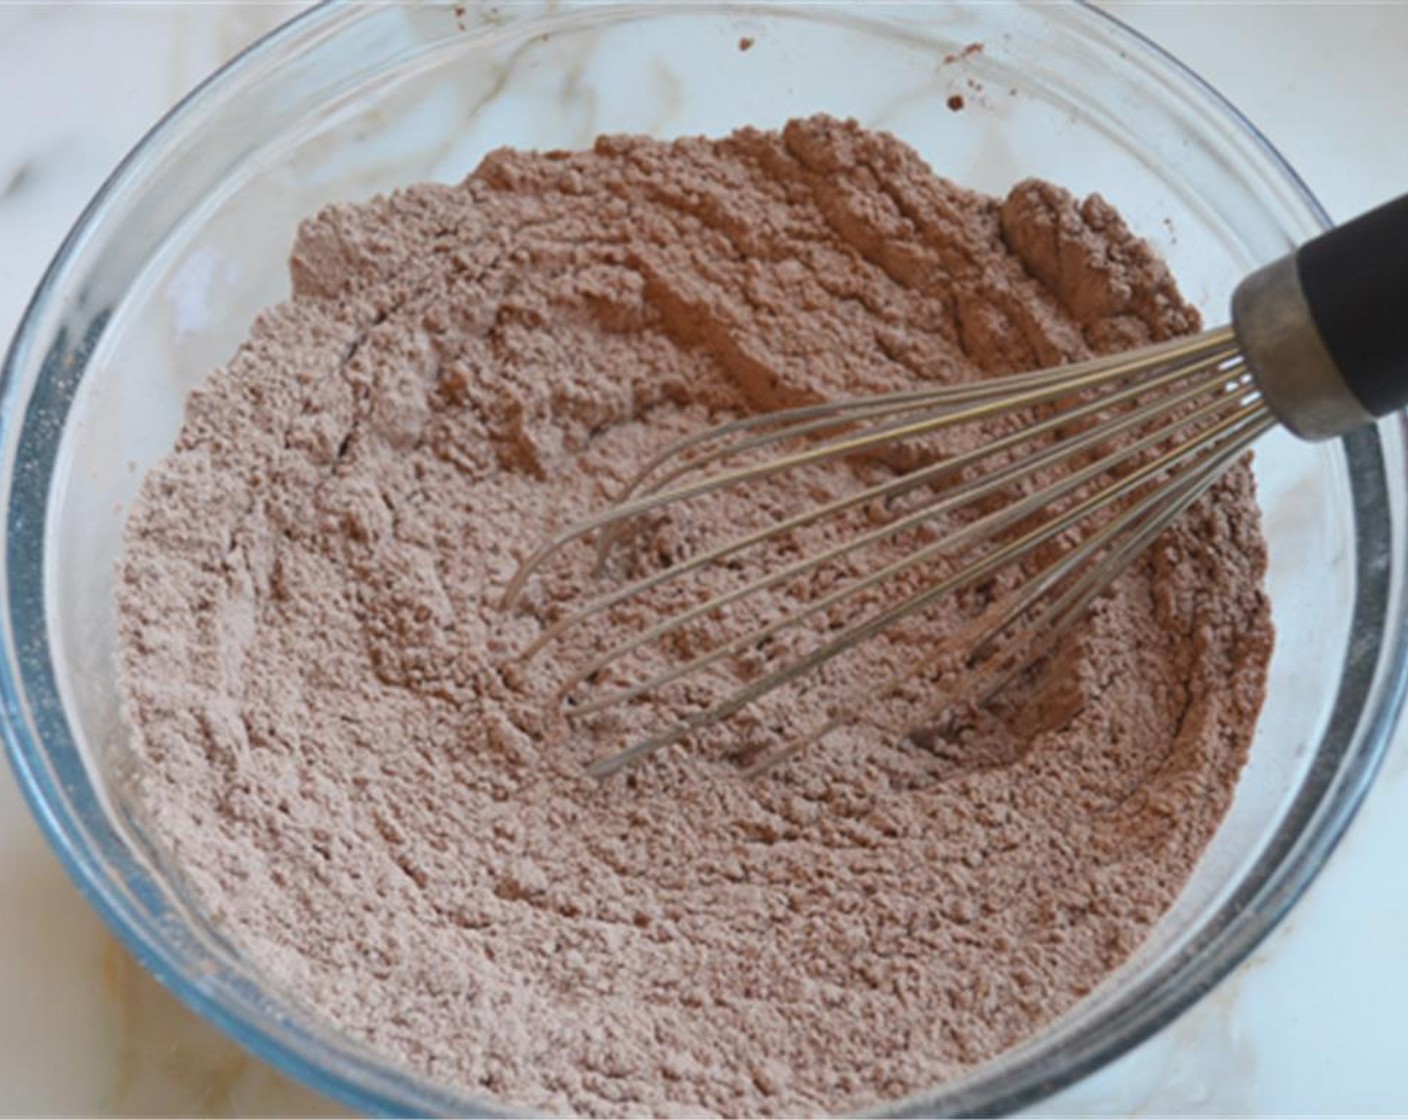 step 2 In a medium bowl, whisk together the All-Purpose Flour (1 3/4 cups), All-Purpose Flour (2 Tbsp), Unsweetened Cocoa Powder (1/4 cup), Unsweetened Cocoa Powder (2 Tbsp), Baking Soda (1 tsp) and Salt (3/4 tsp).